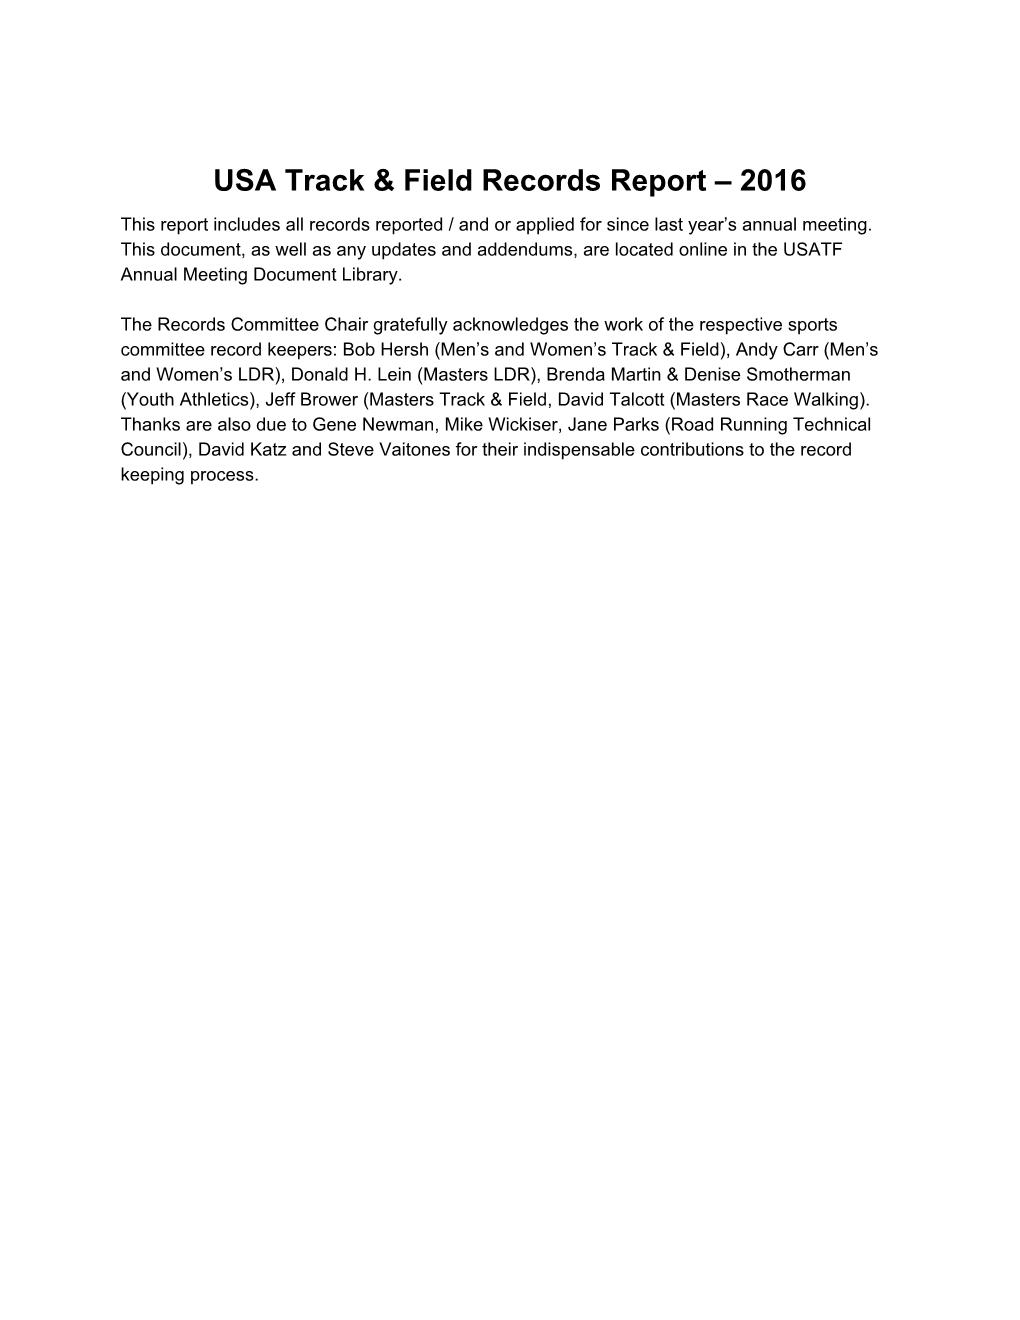 Records Report – 2016 This Report Includes All Records Reported / and Or Applied for Since Last Year’S Annual Meeting